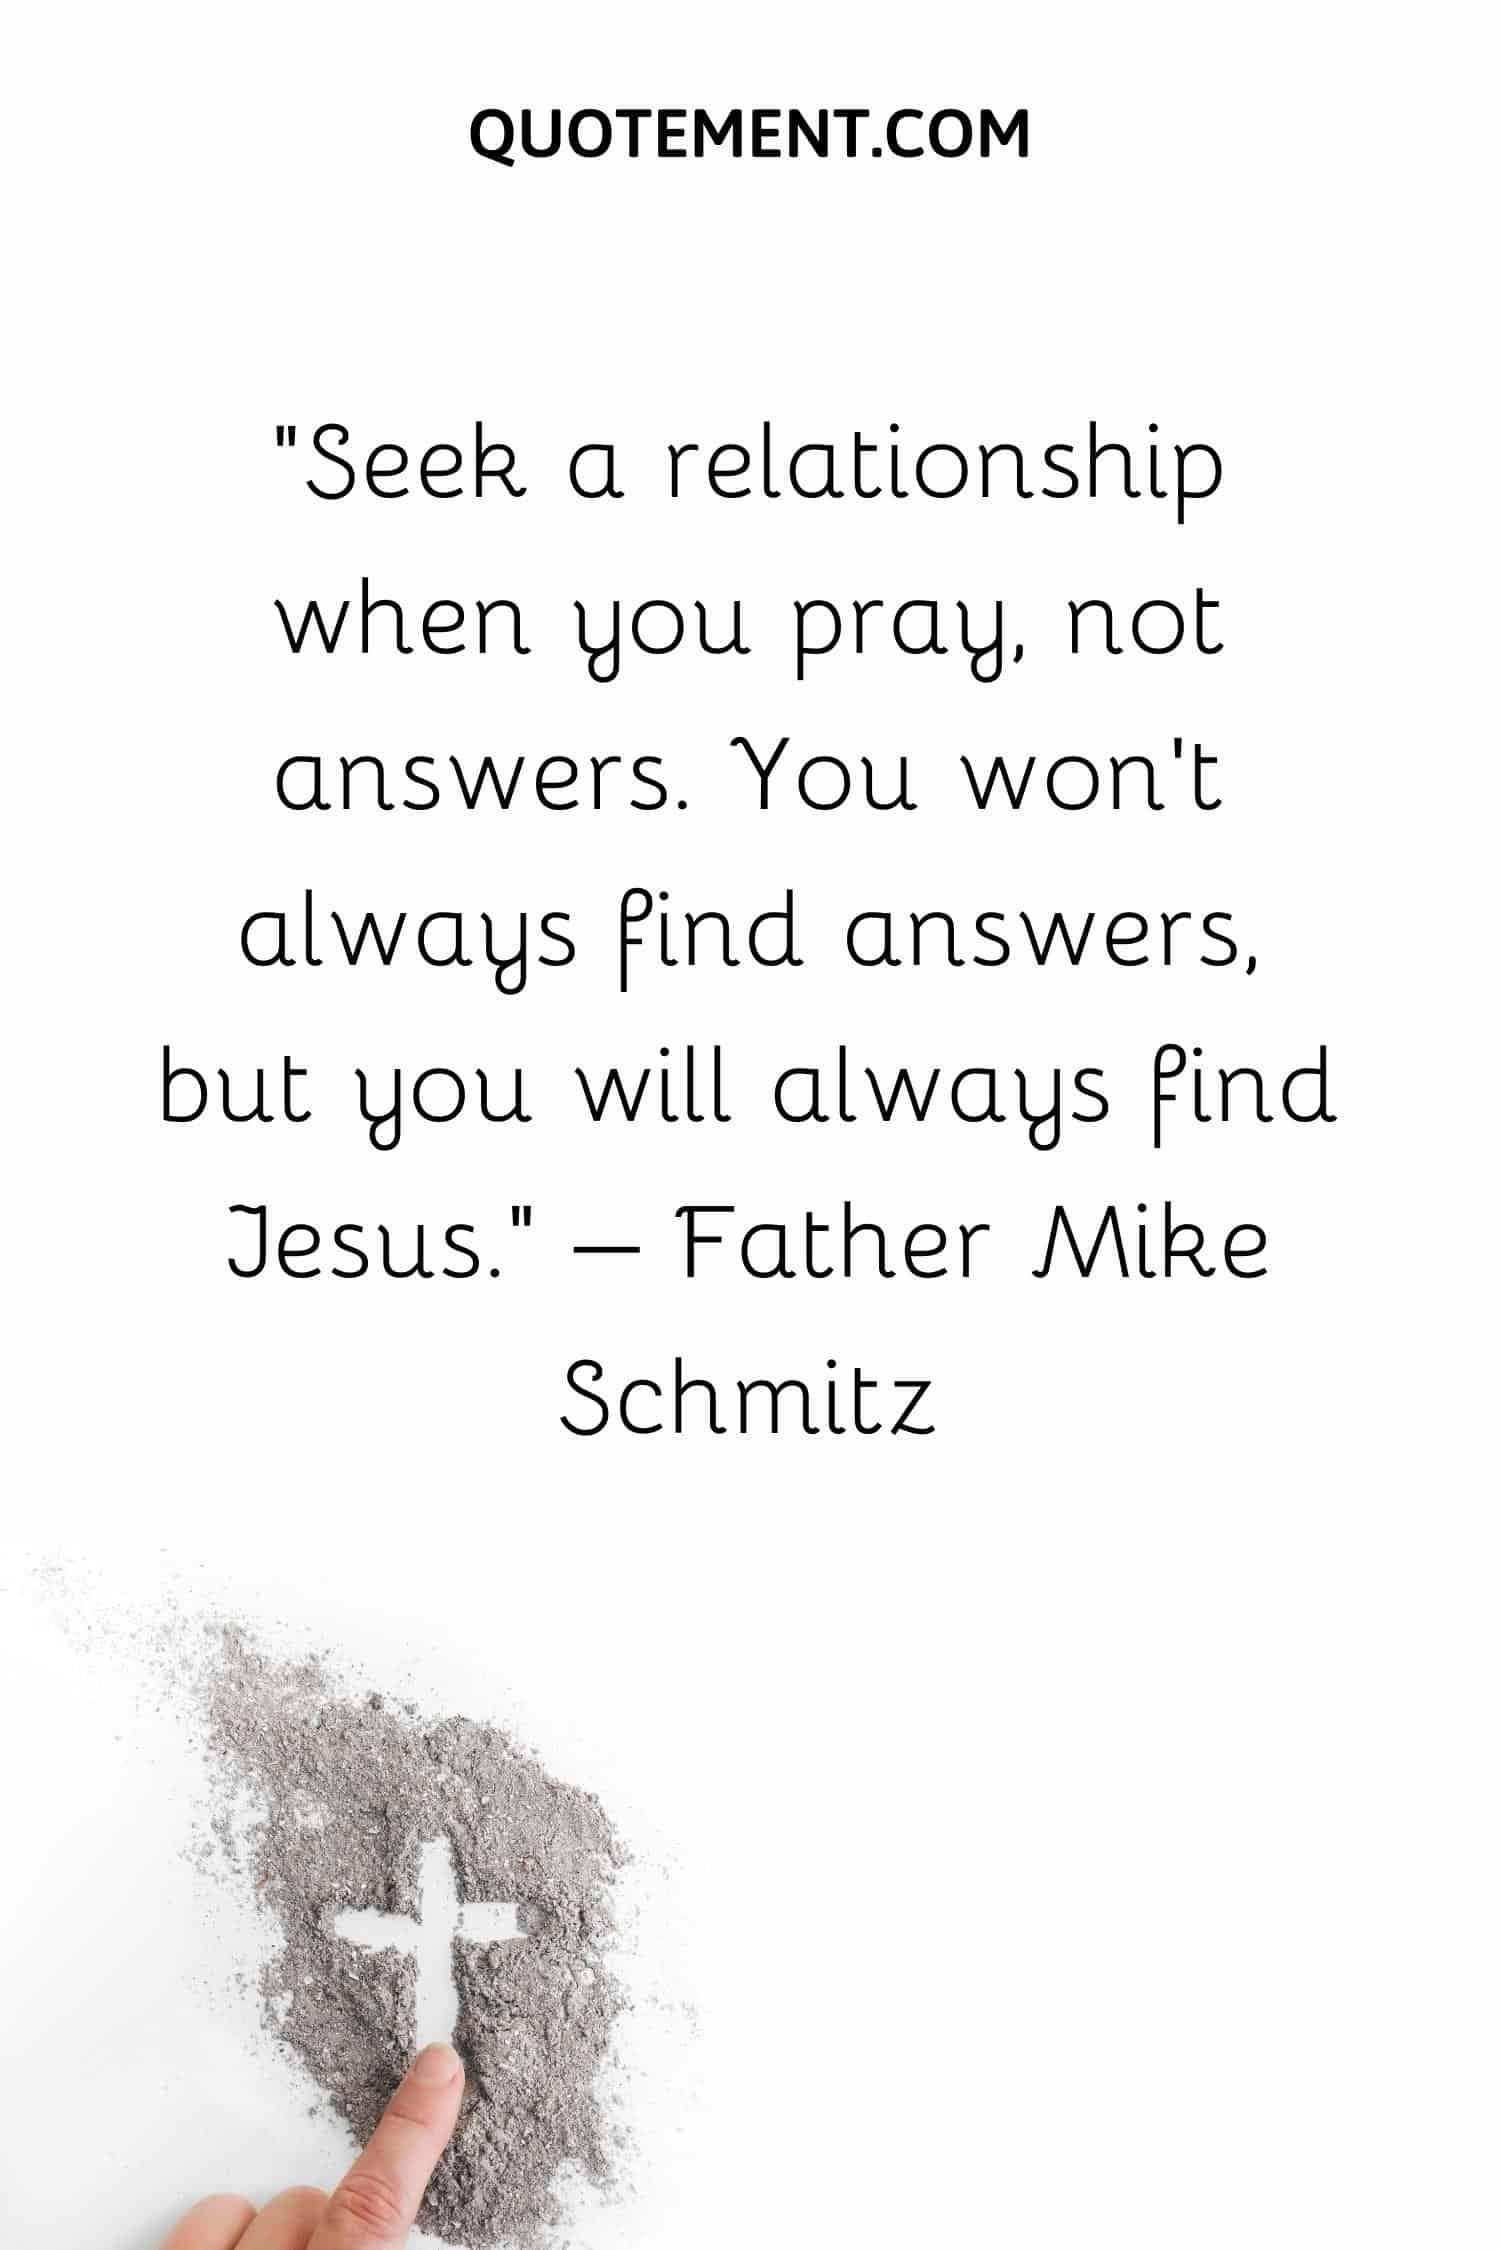 Seek a relationship when you pray, not answers